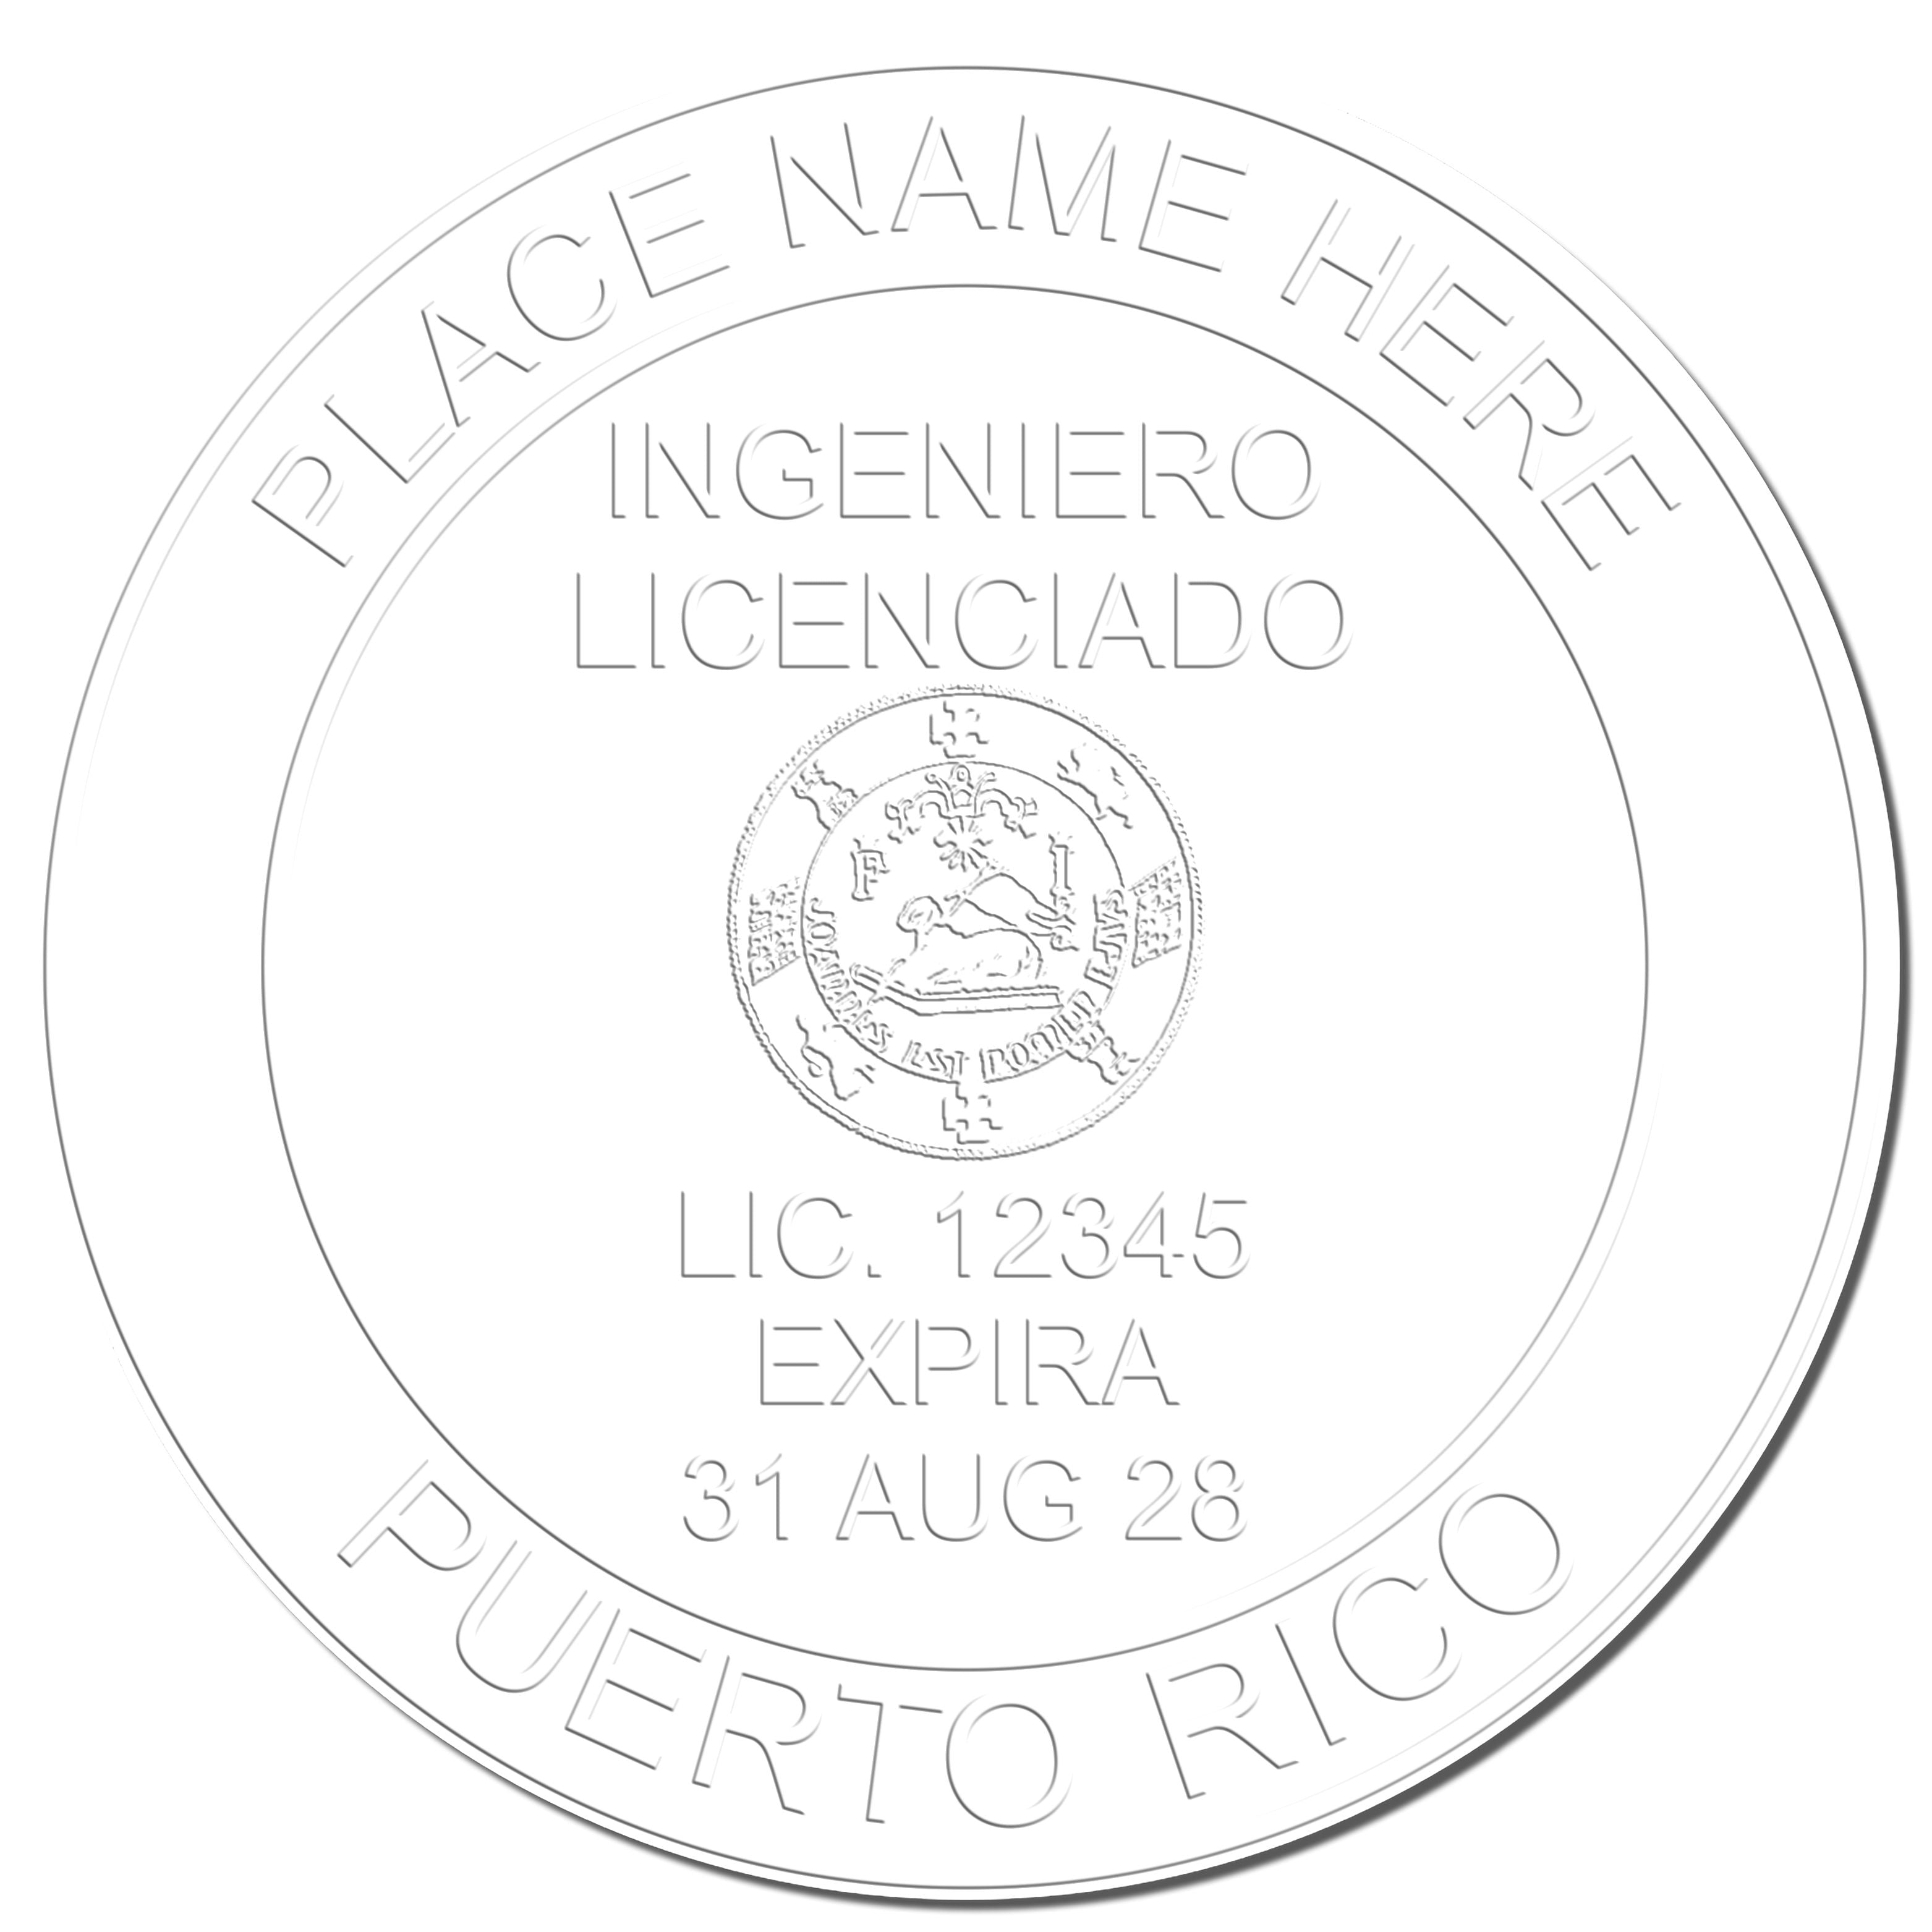 A photograph of the Handheld Puerto Rico Professional Engineer Embosser stamp impression reveals a vivid, professional image of the on paper.